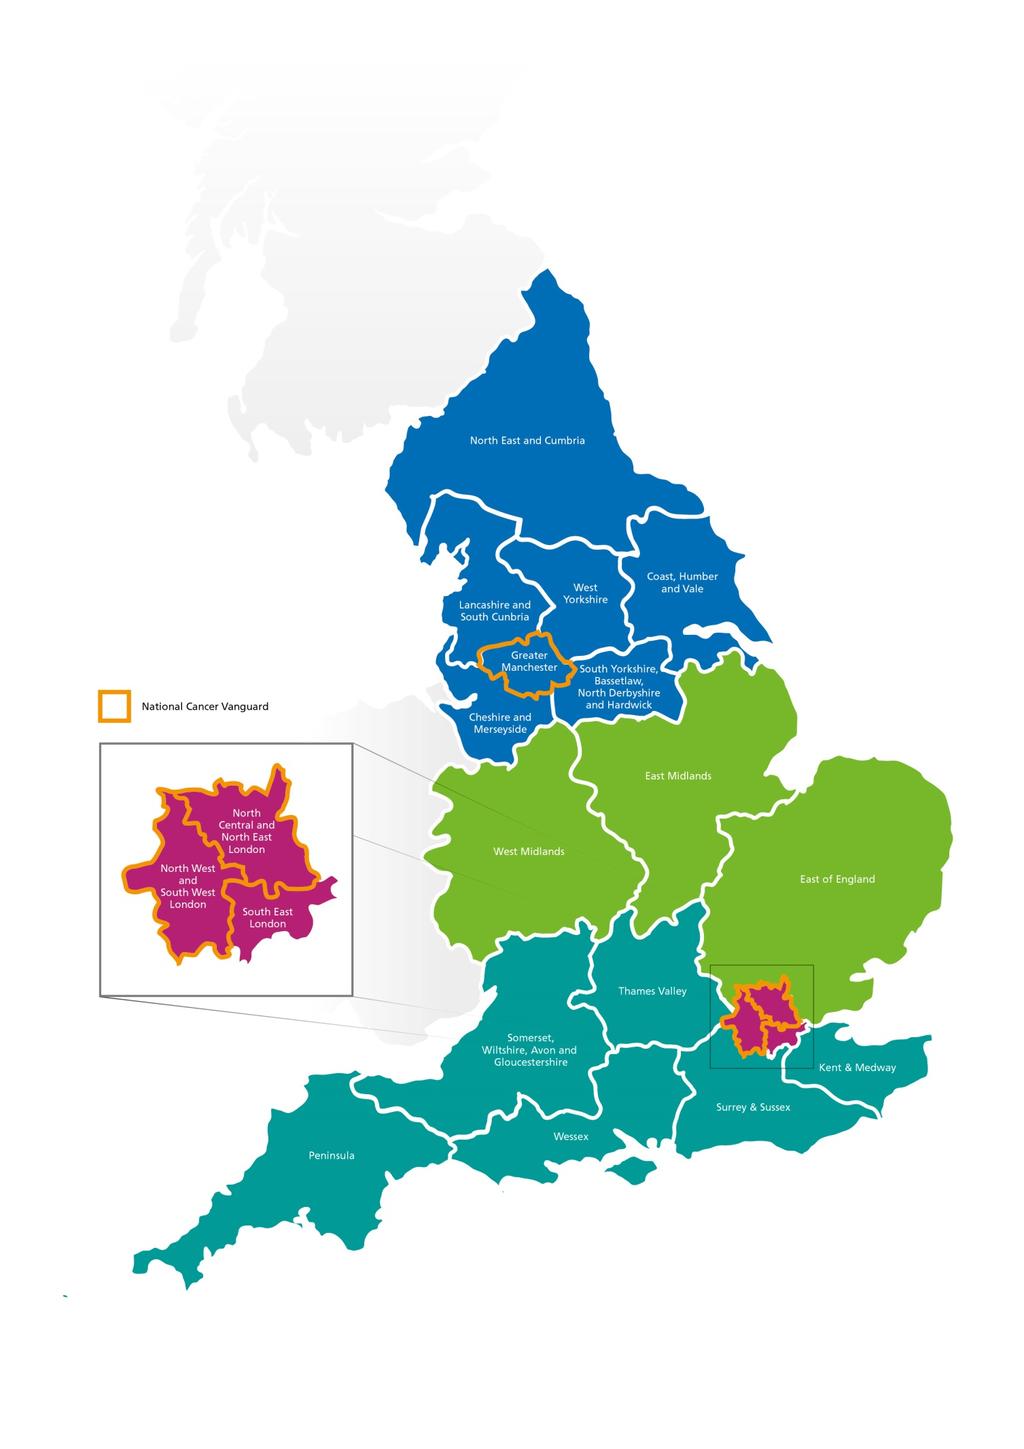 Map of Cancer Alliances APPENDIX A North 1. North East and Cumbria 2. Lancashire and South Cumbria 3. Cheshire and Merseyside 4. West Yorkshire 5. Humber, Coast and Vale 6.